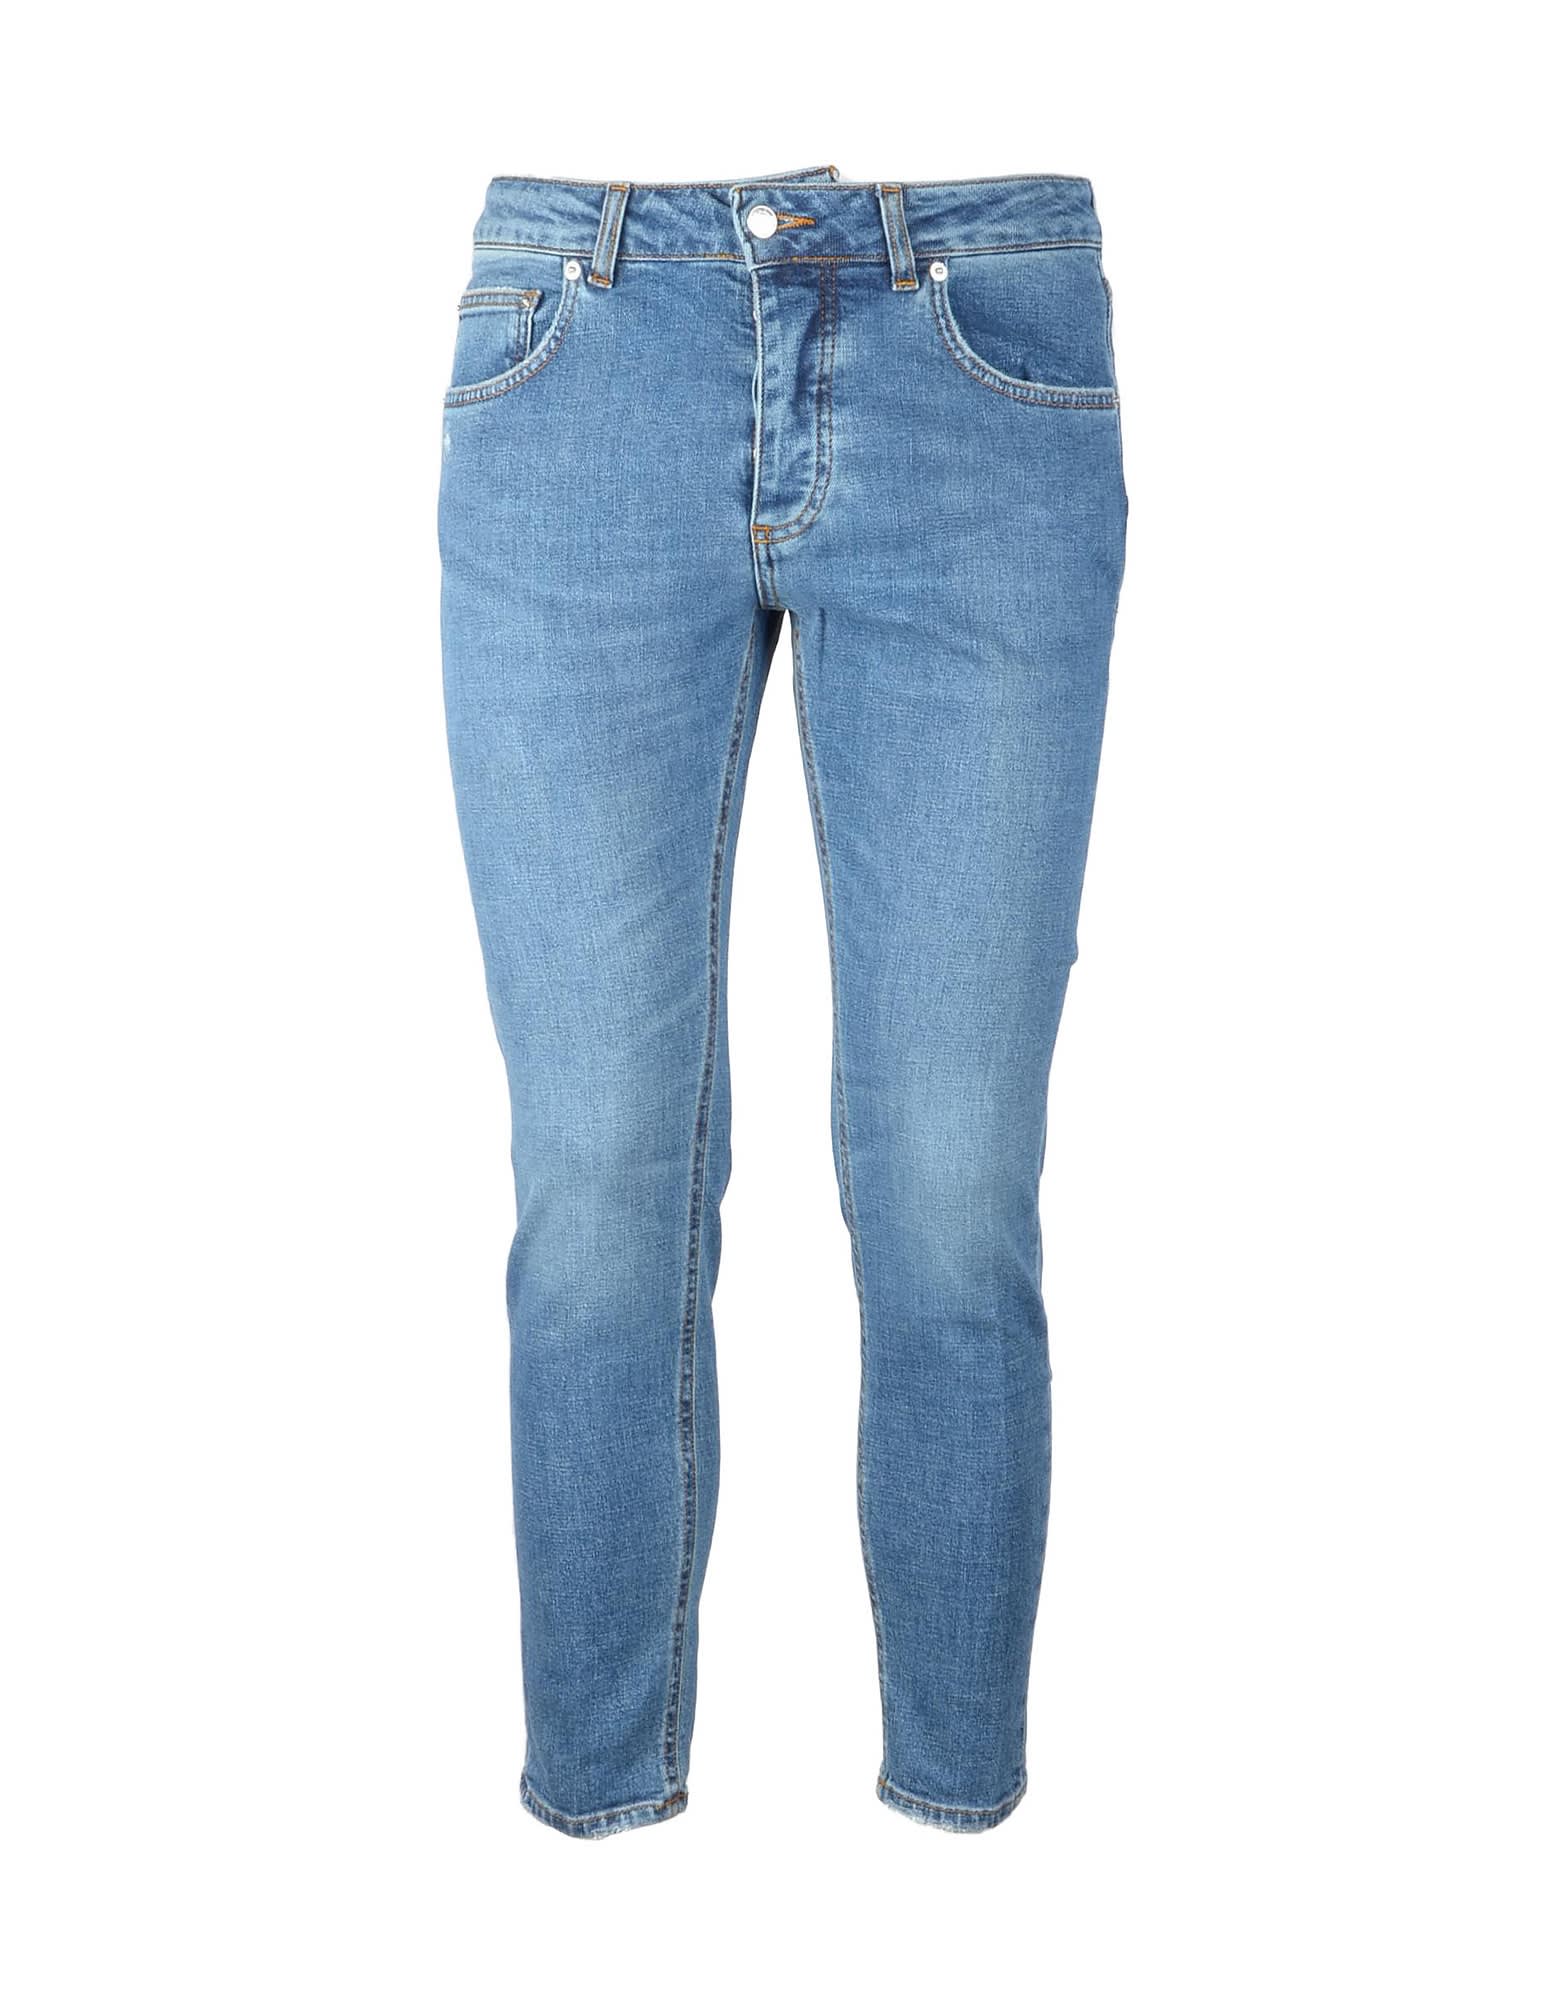 Be Able Mens Blue Jeans